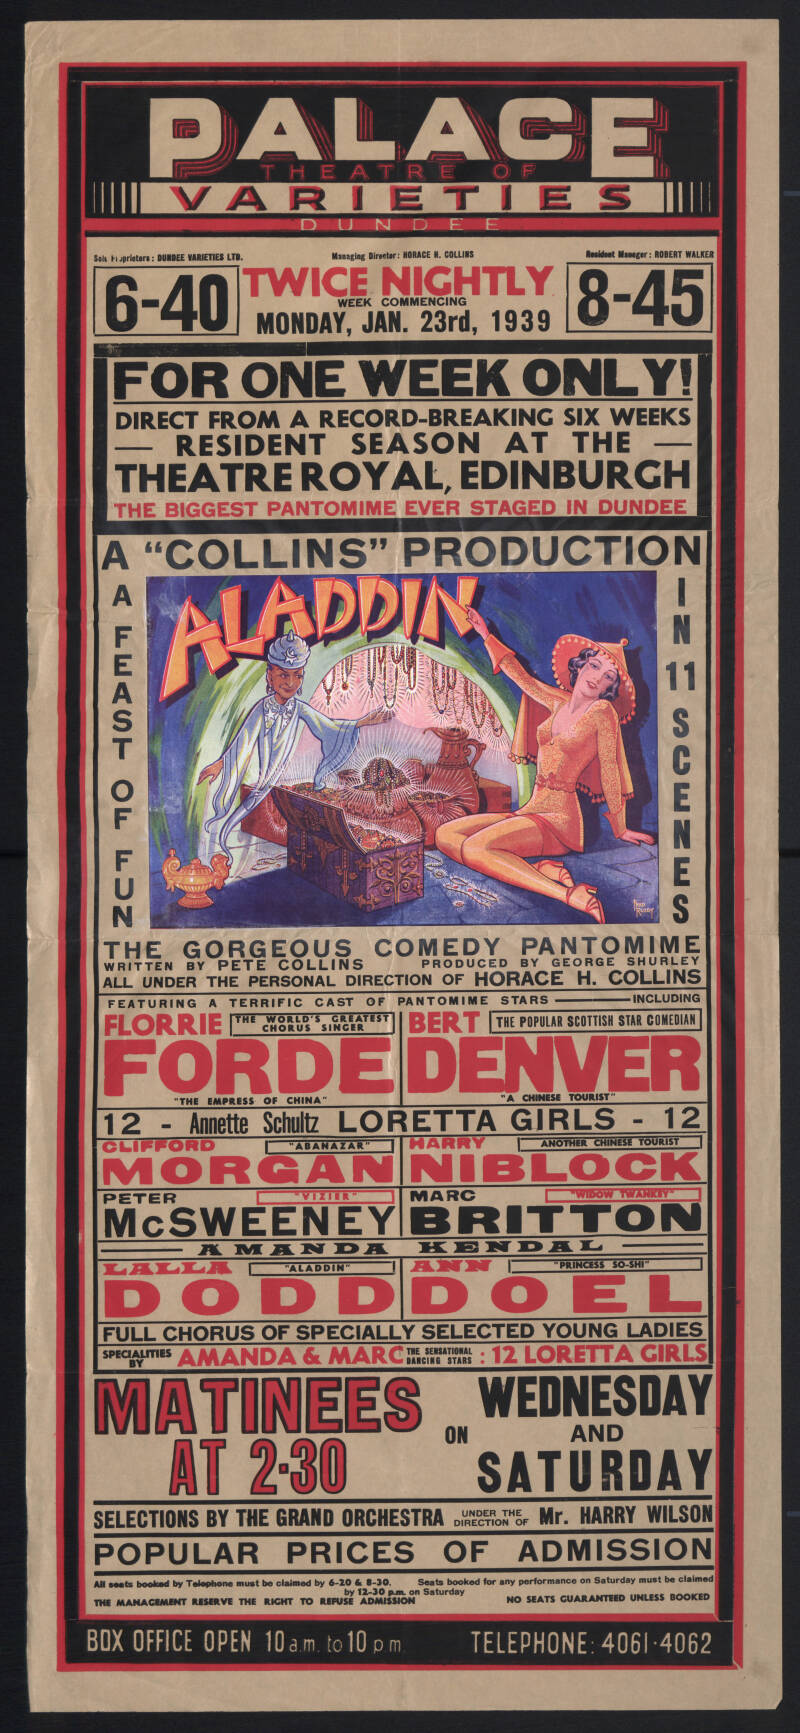 A playbill for Aladdin at the Palace Theatre of Varieties on January 23rd, 1939, with an illustration of a genie with Aladdin